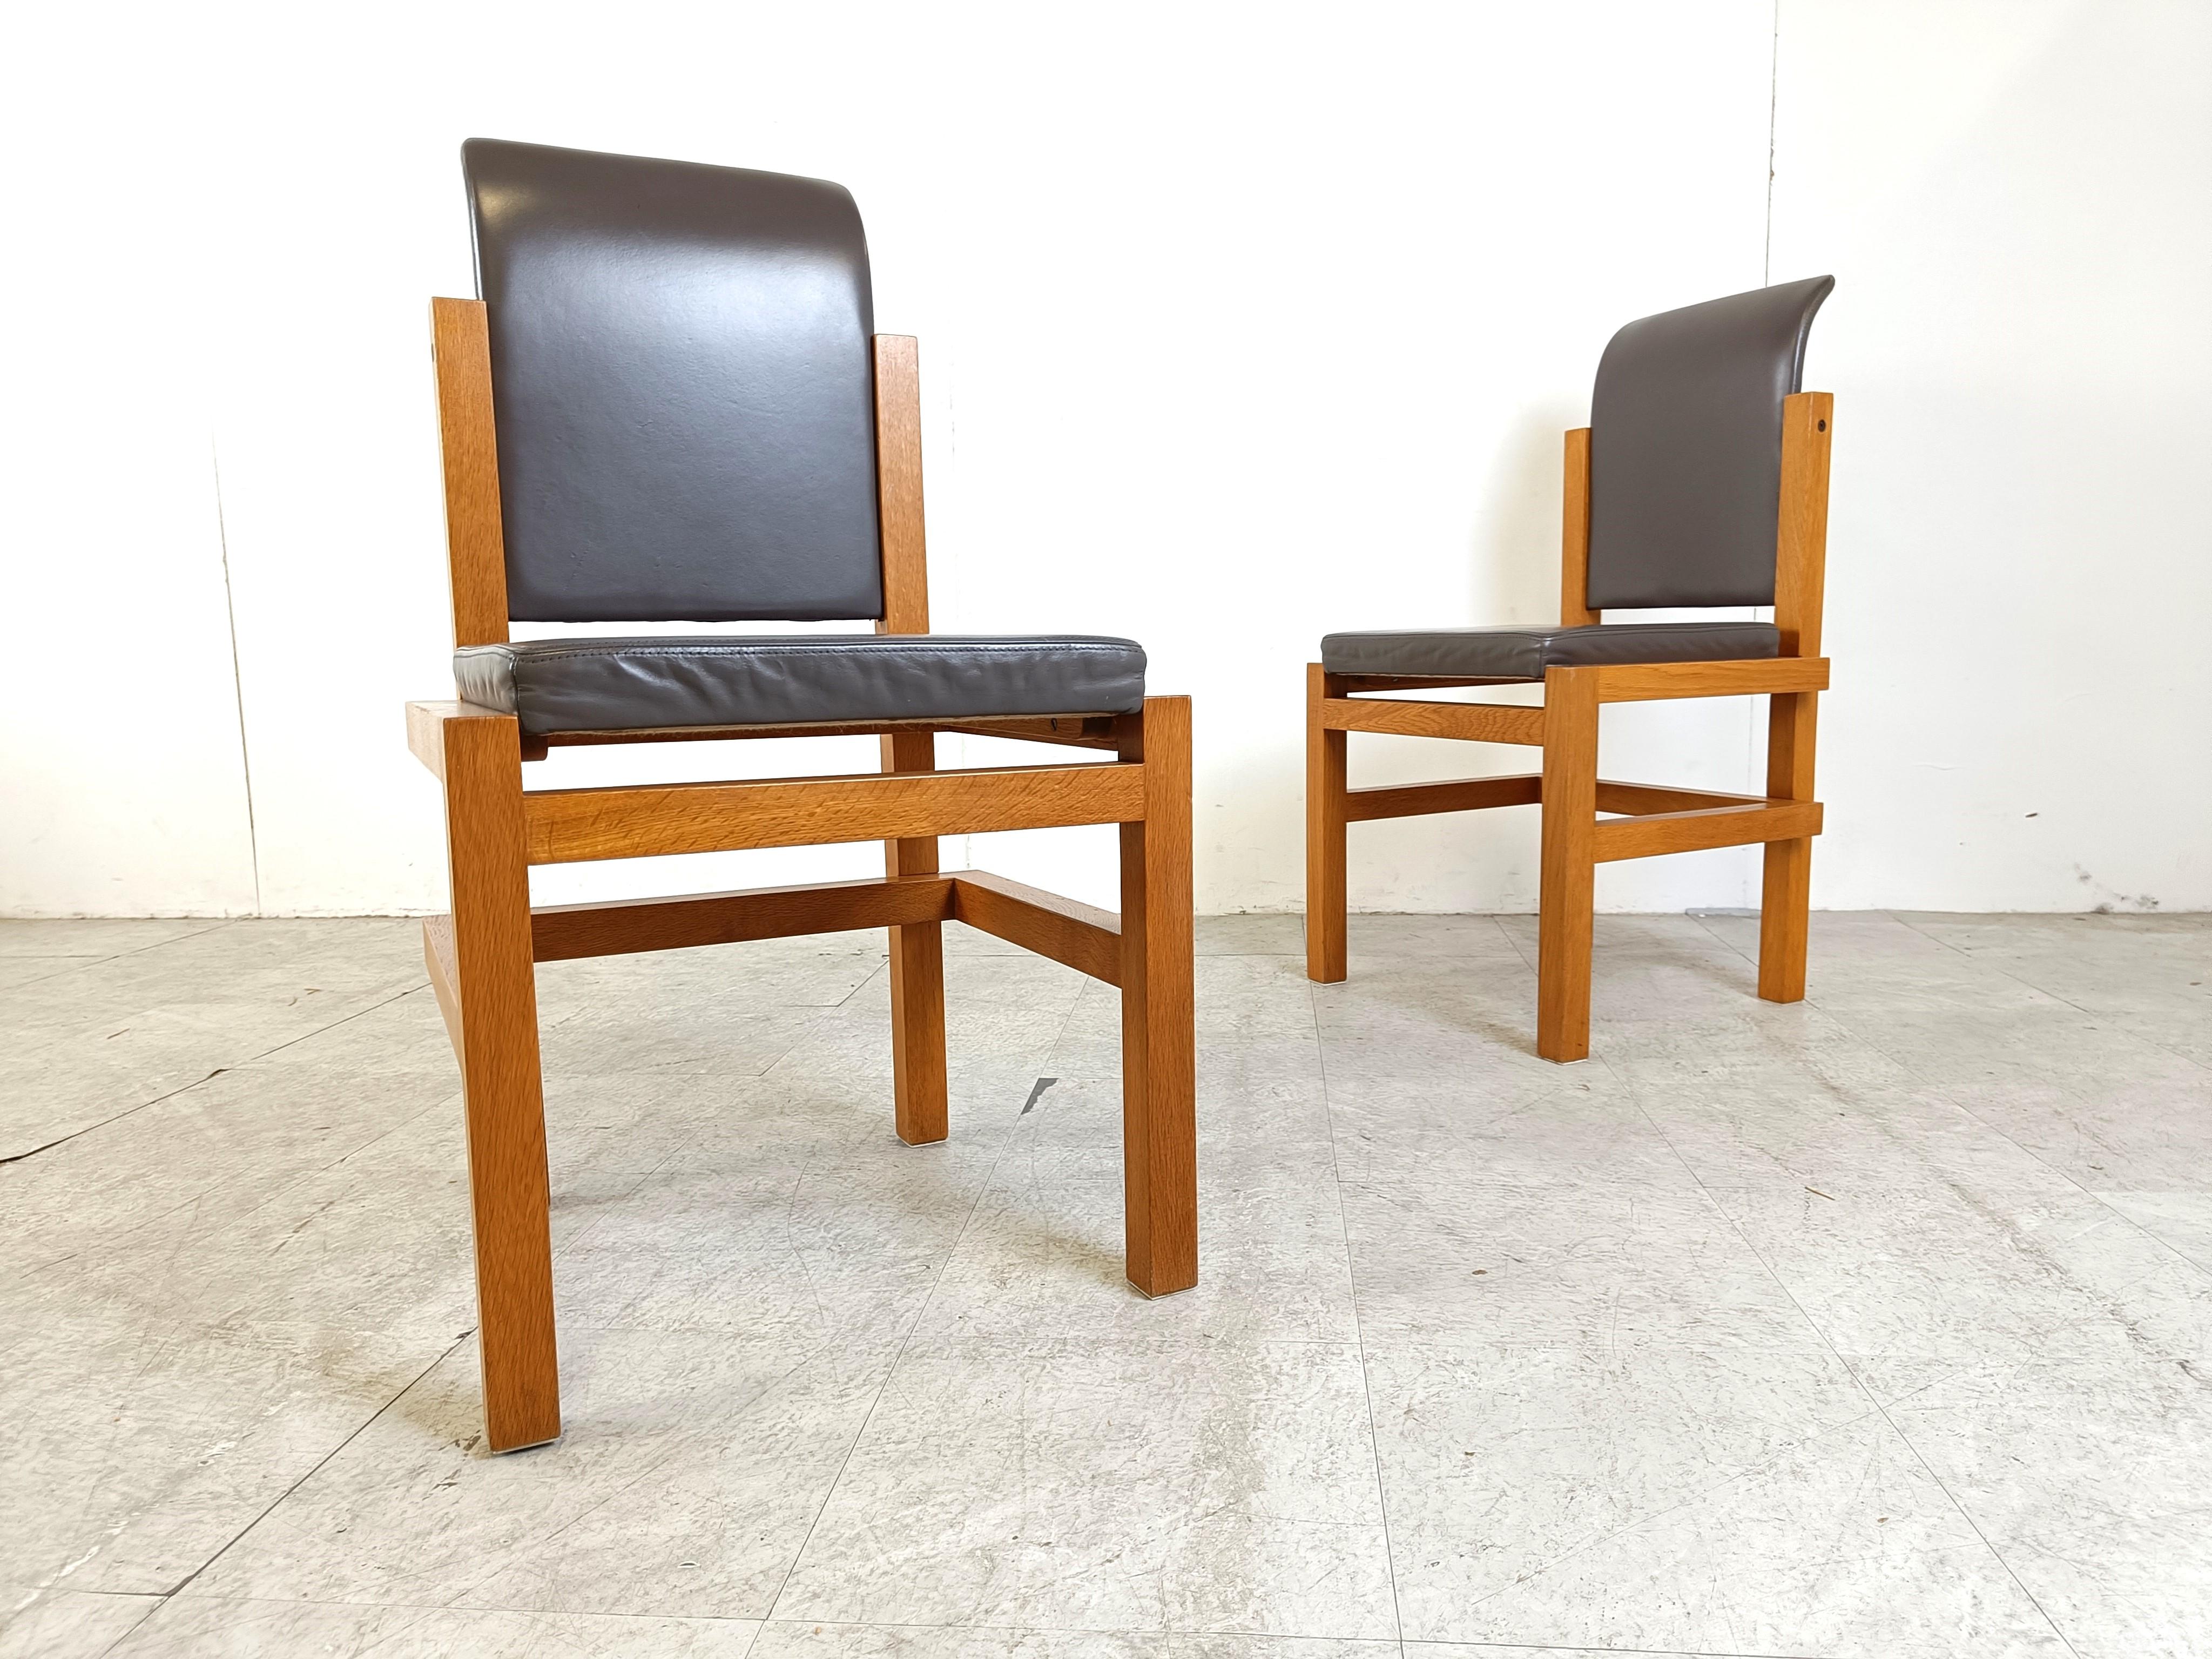 Solid oak dining chairs by Meubelatelier Vanda, 1970s For Sale 3